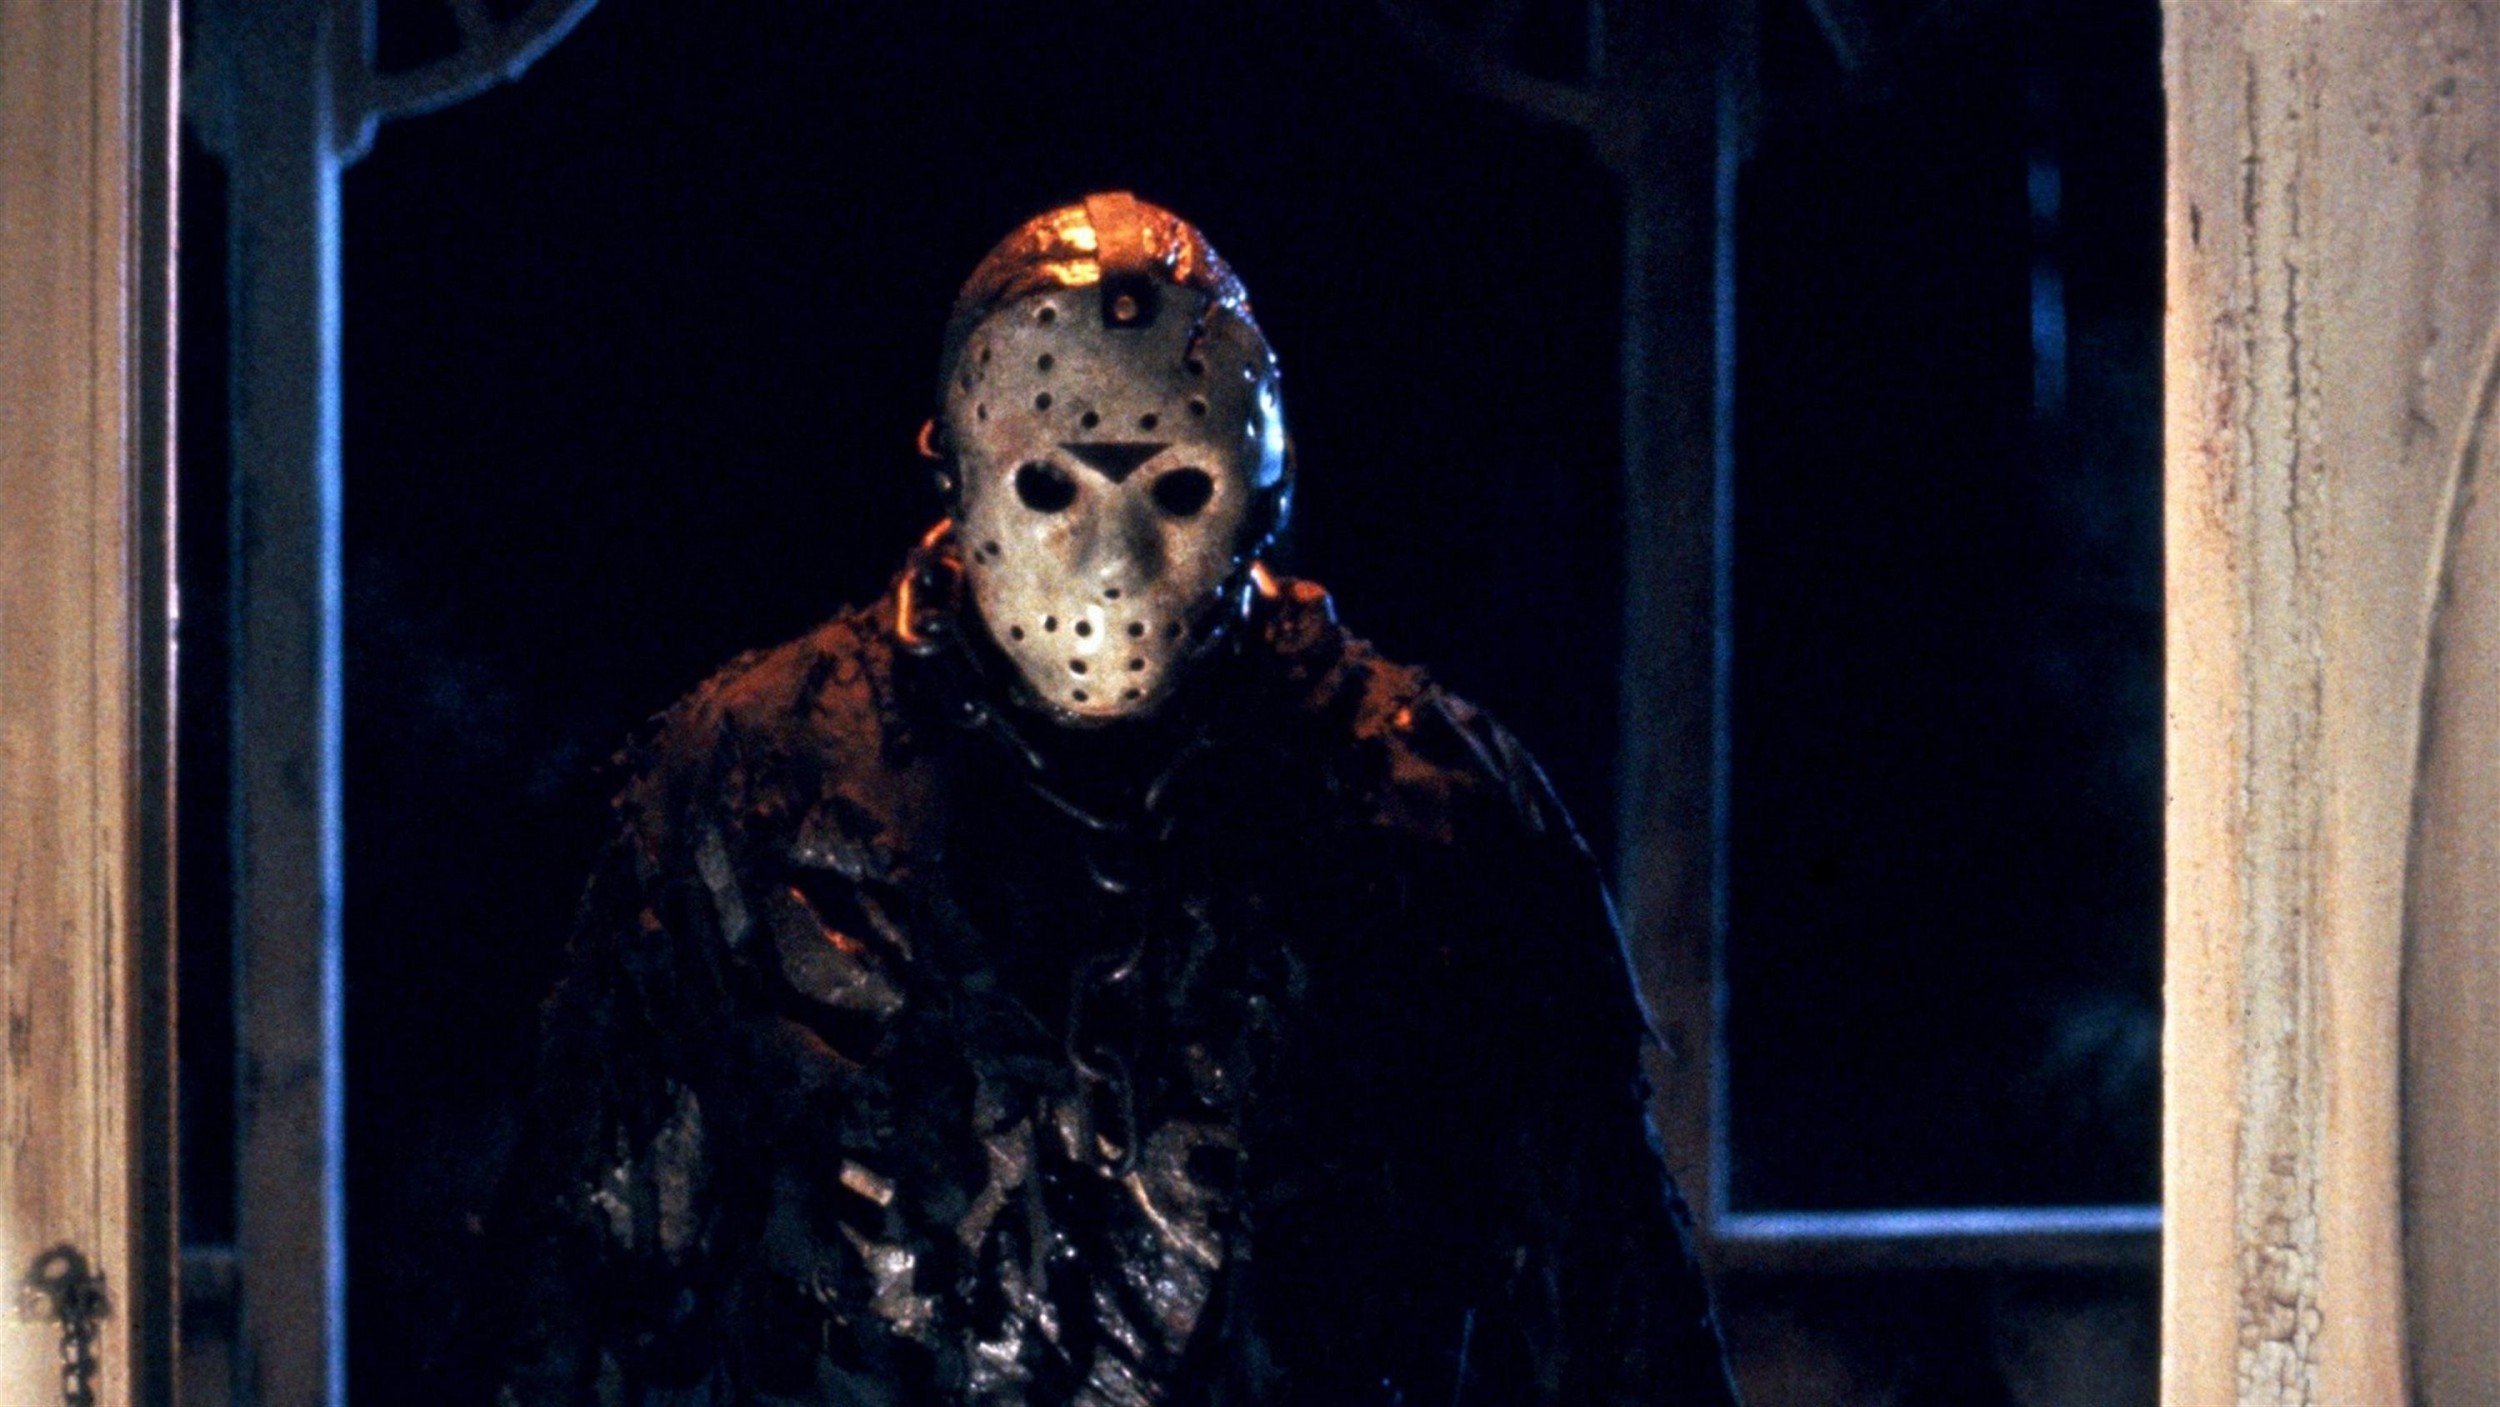 Everyones Favorite Jason Voorhees Describes Being Set On Fire For 44 